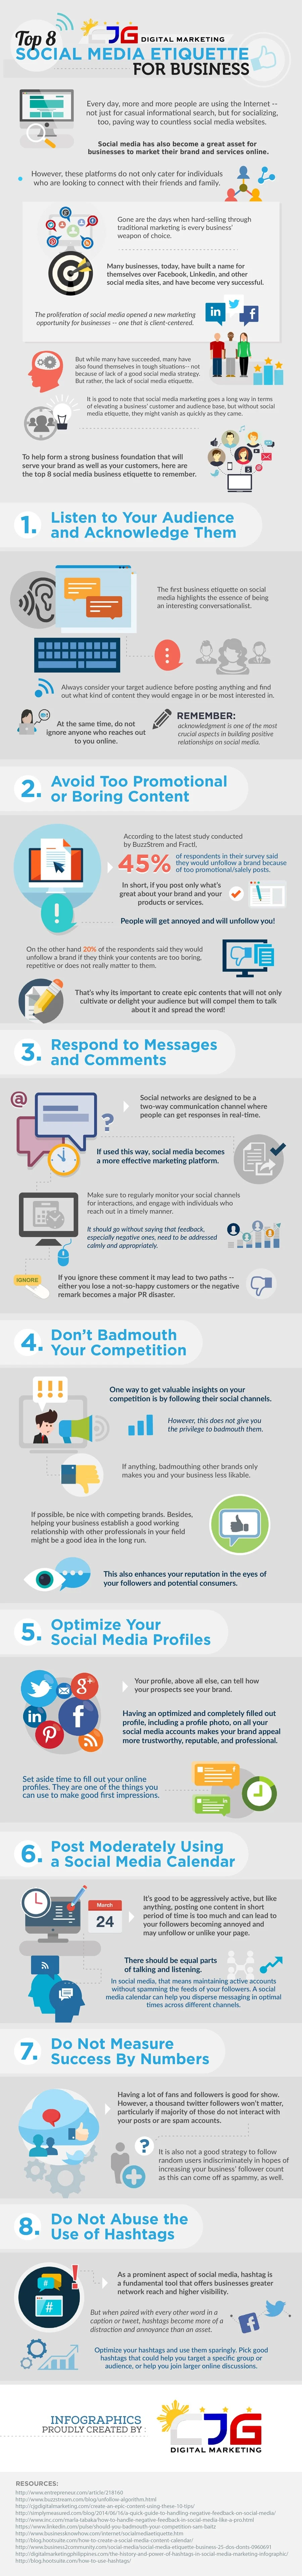 Top 8 Social Media Etiquette for Business - #Infographic